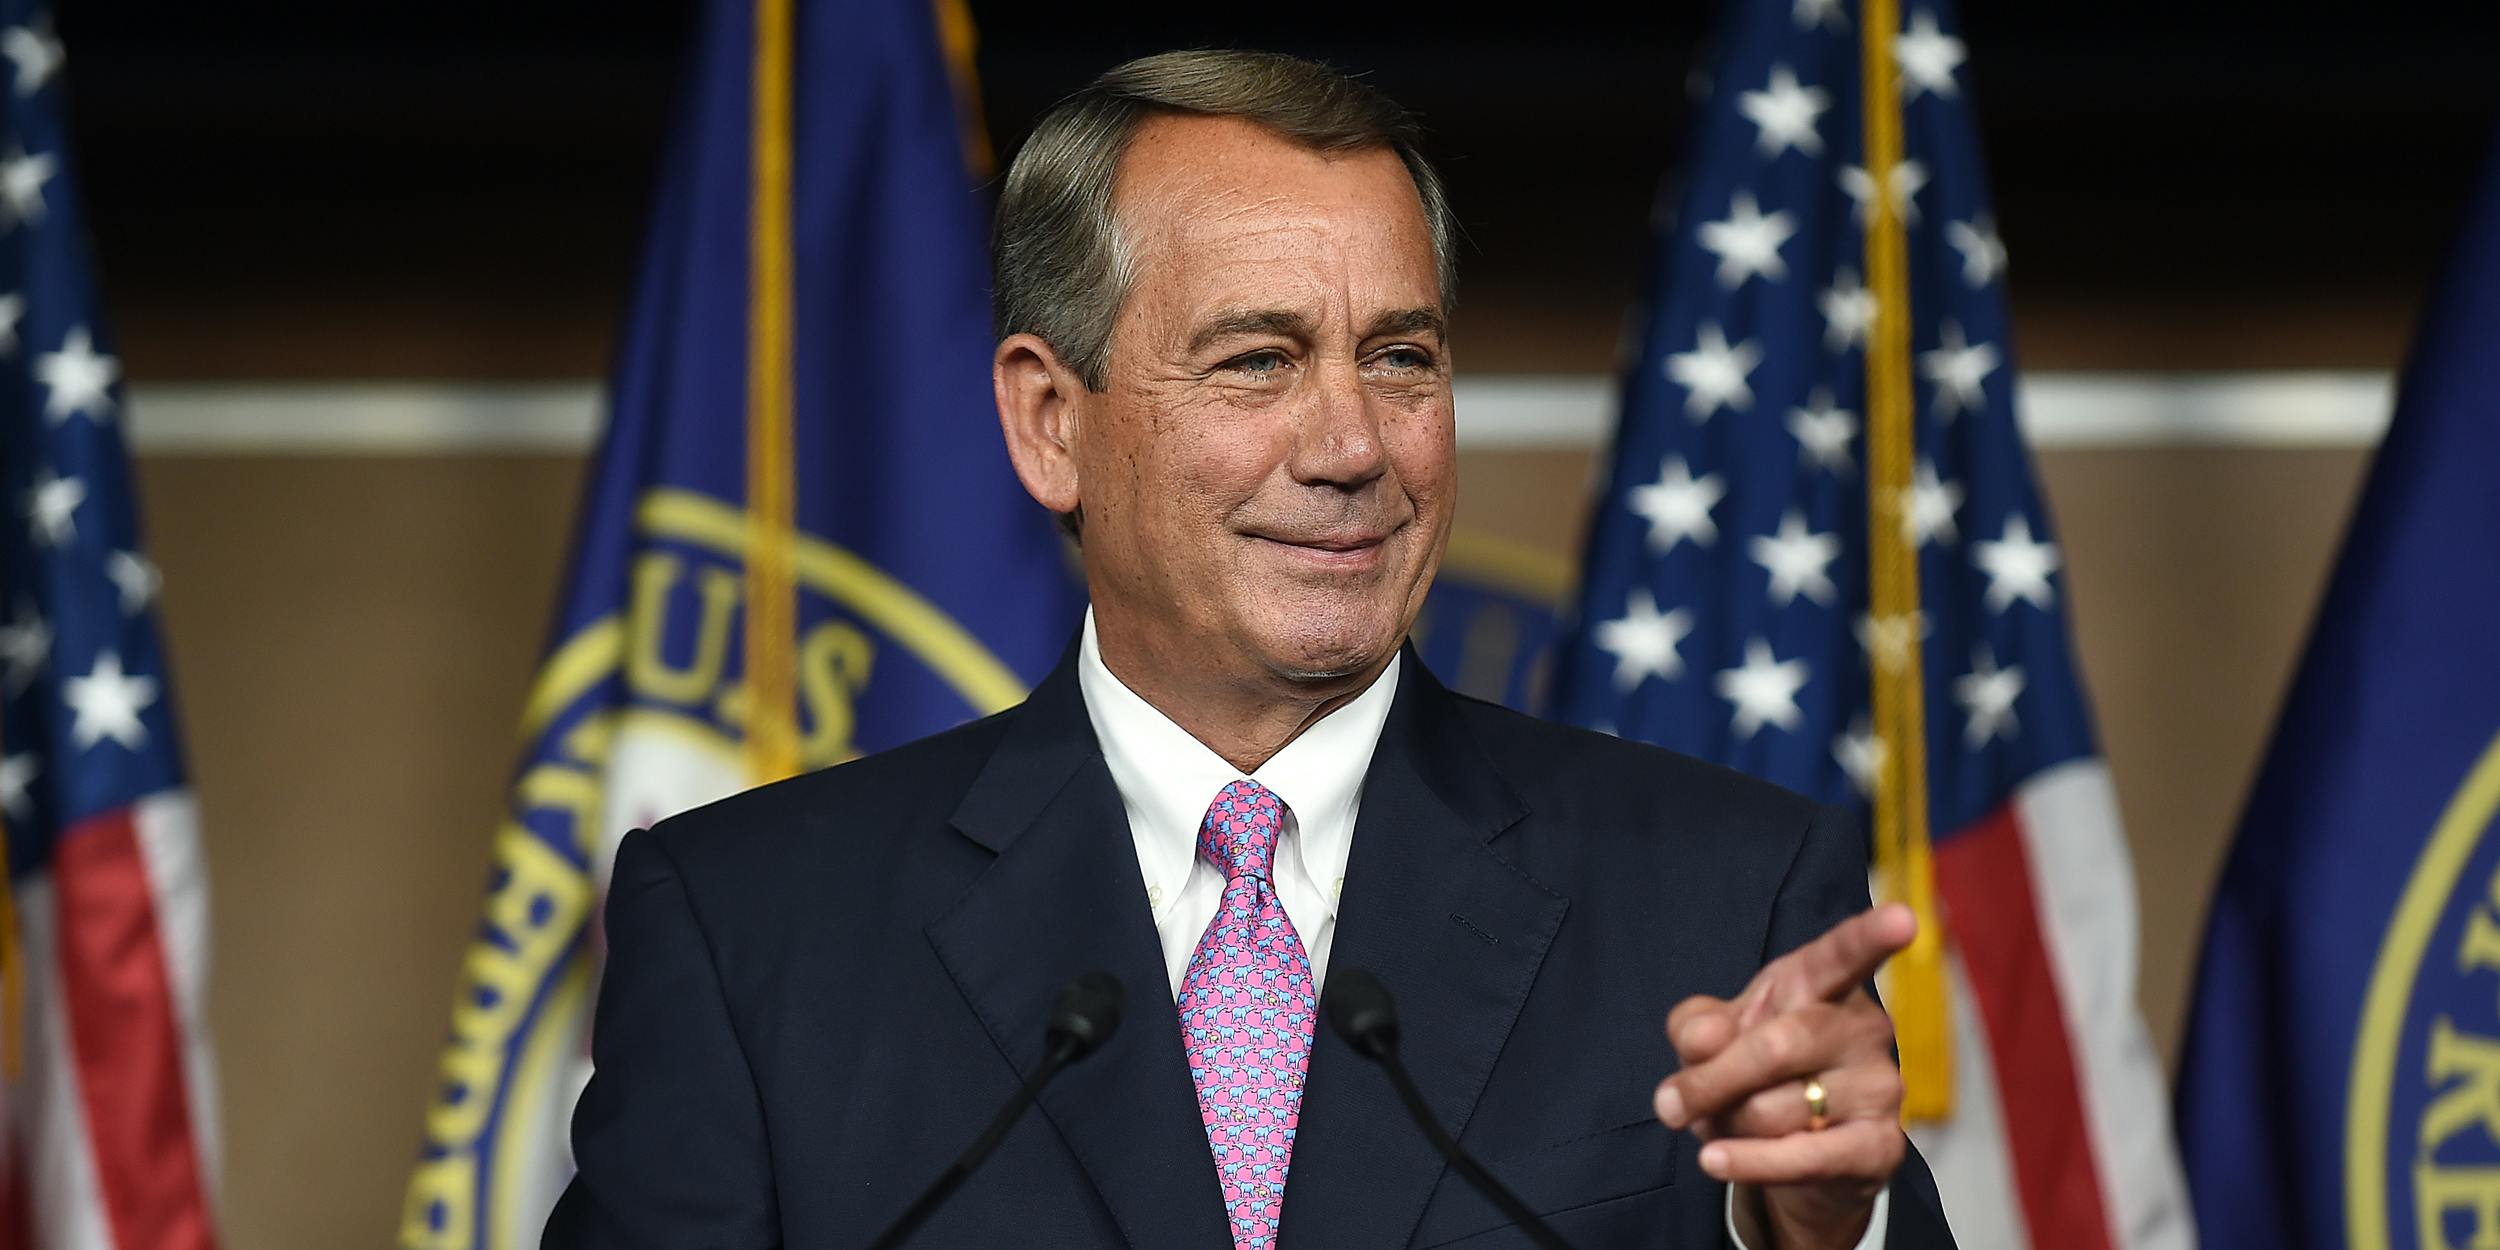 Former Speaker of the House John Boehner just publicly supported de-scheduling cannabis